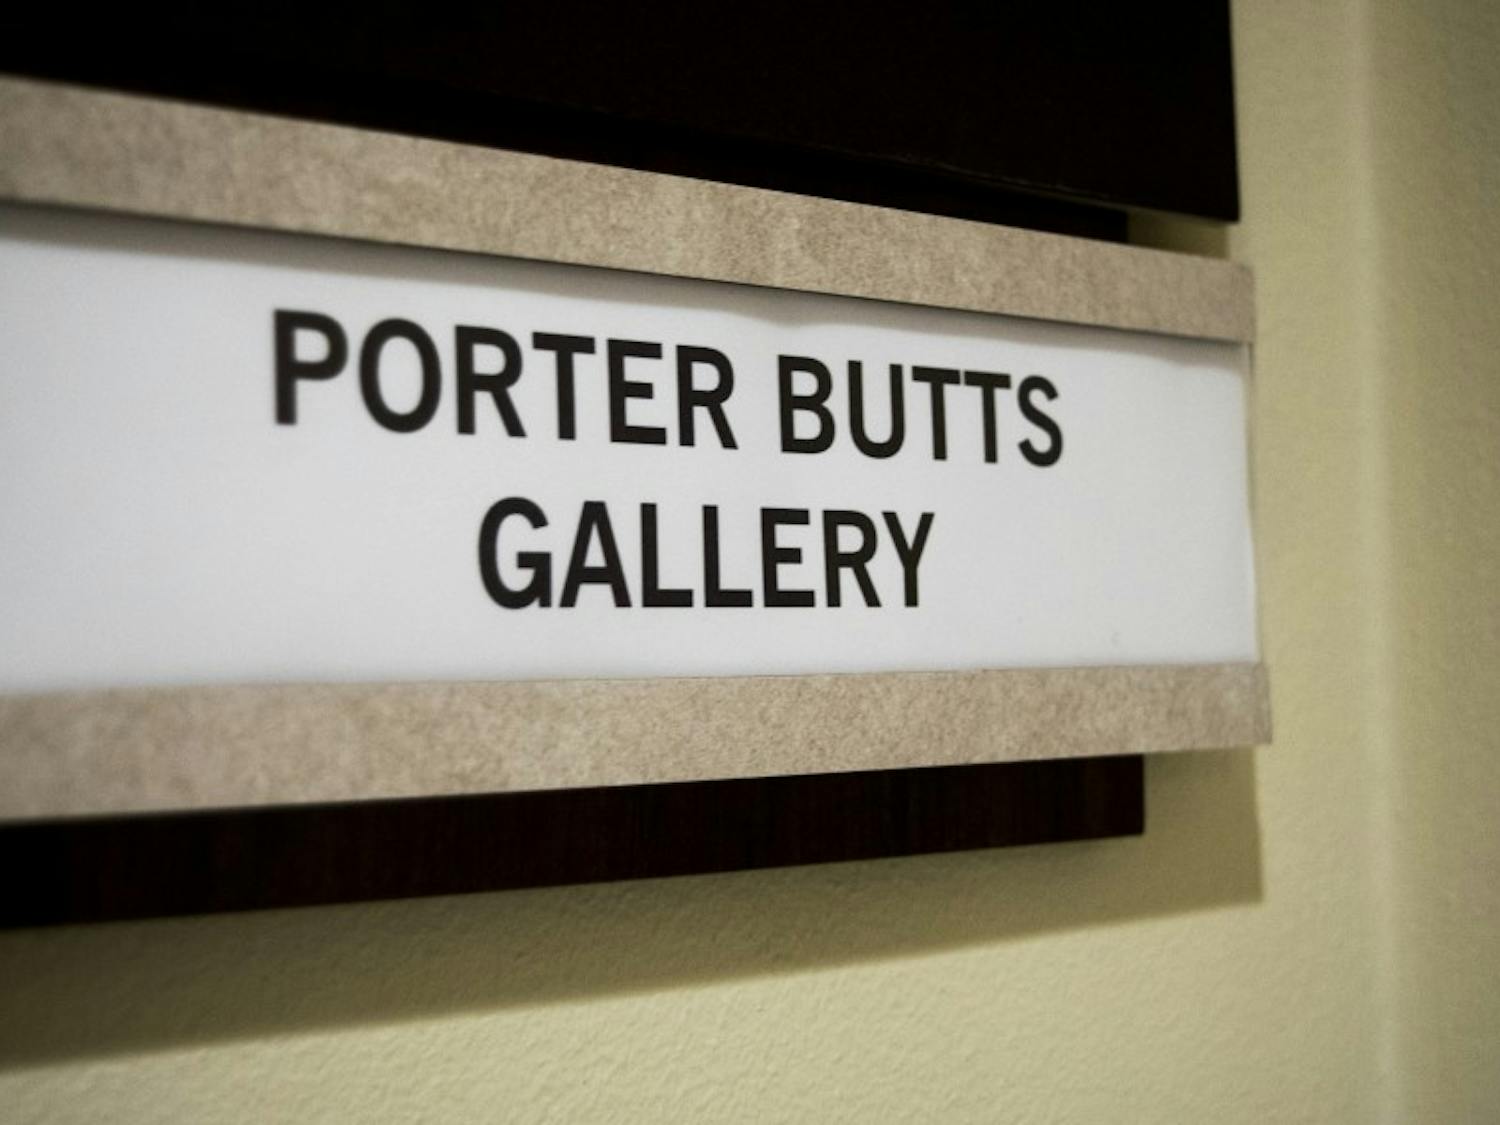 The group suggested the university address the struggles of underrepresented groups today but provided no answer regarding the renaming of the Fredric March Play Circle and Porter Butts Gallery at the Union &mdash; both named after members of the 1920’s “Klu Klux Klan” student group.